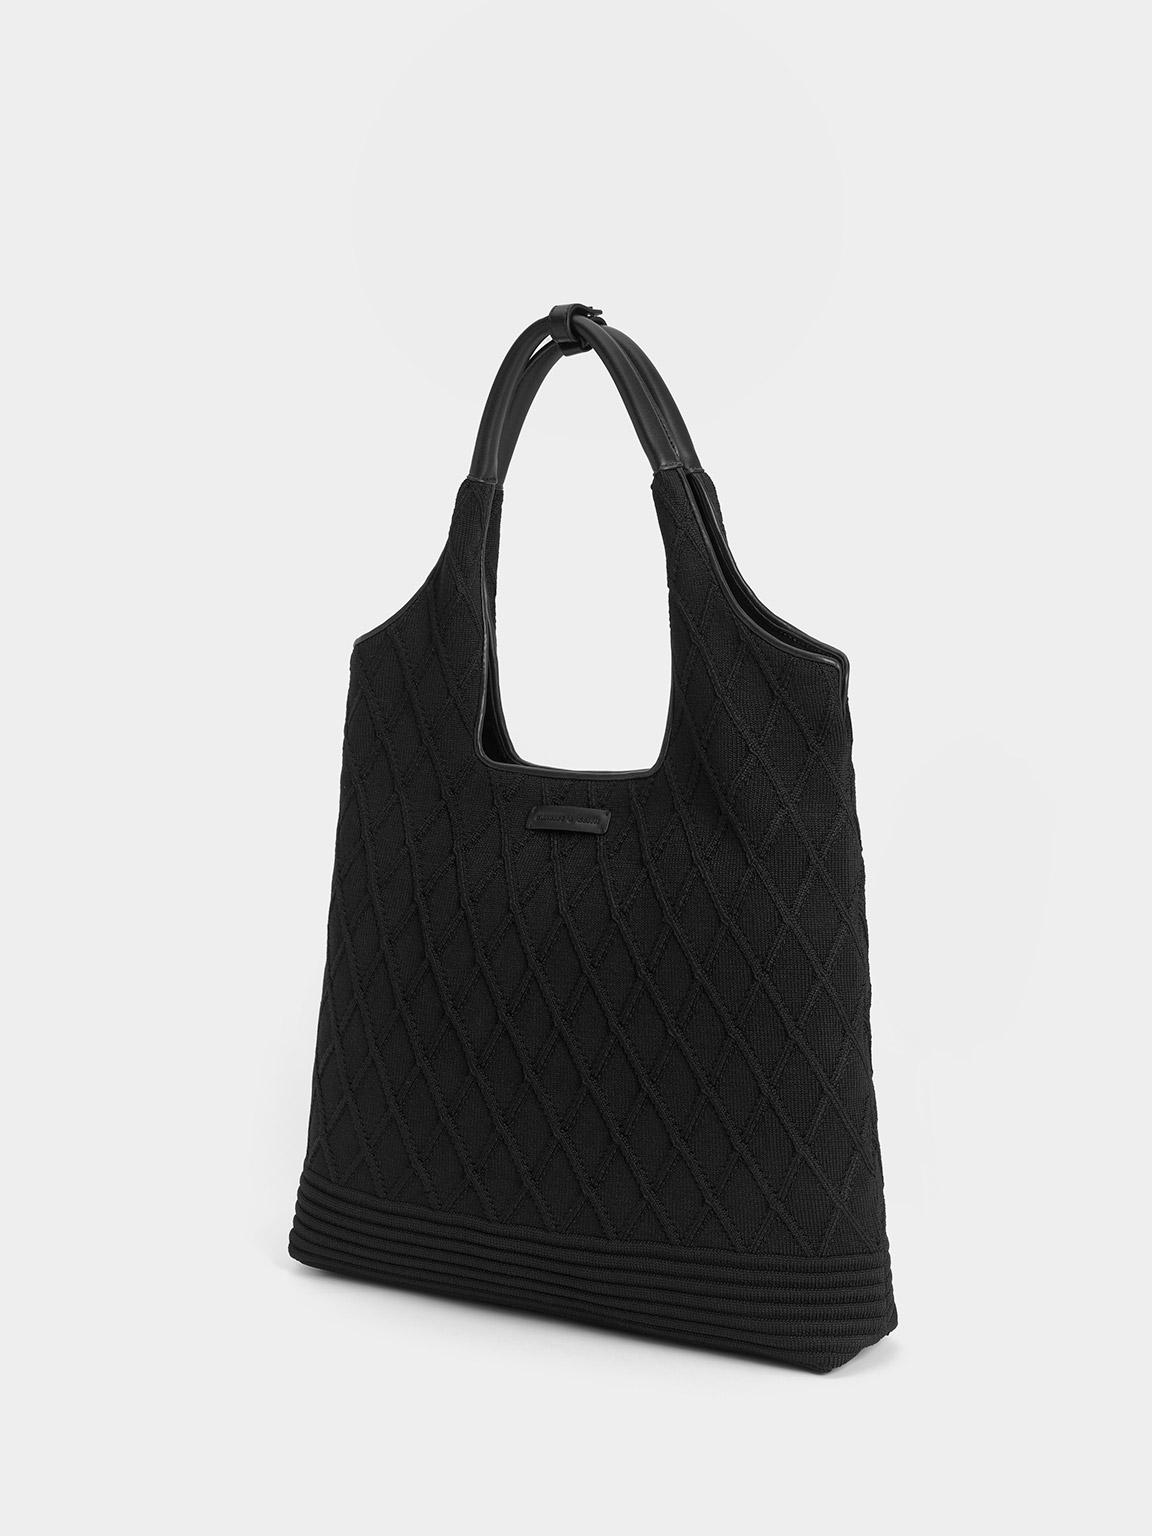 Charles & Keith Willa Knitted Tote Bag in Black